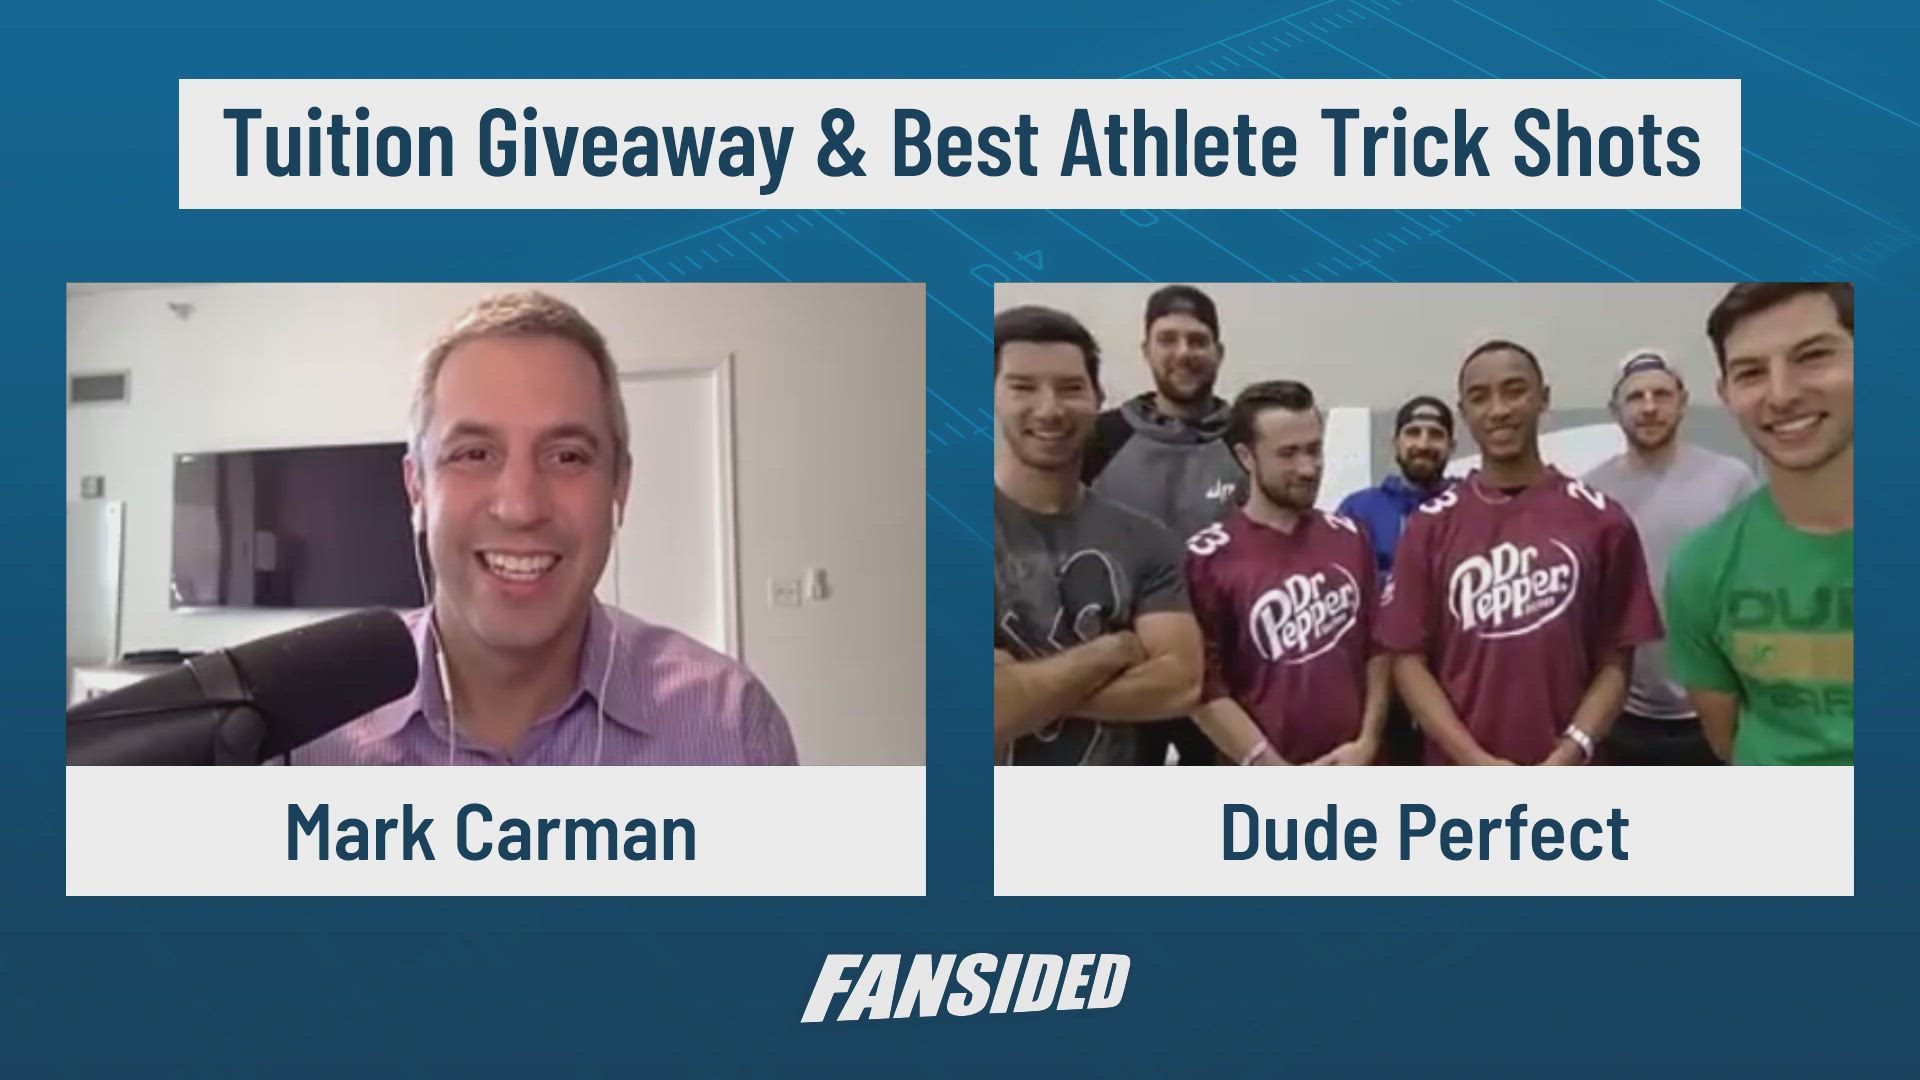 Dude Perfect Previews their Free Tuition Giveaway